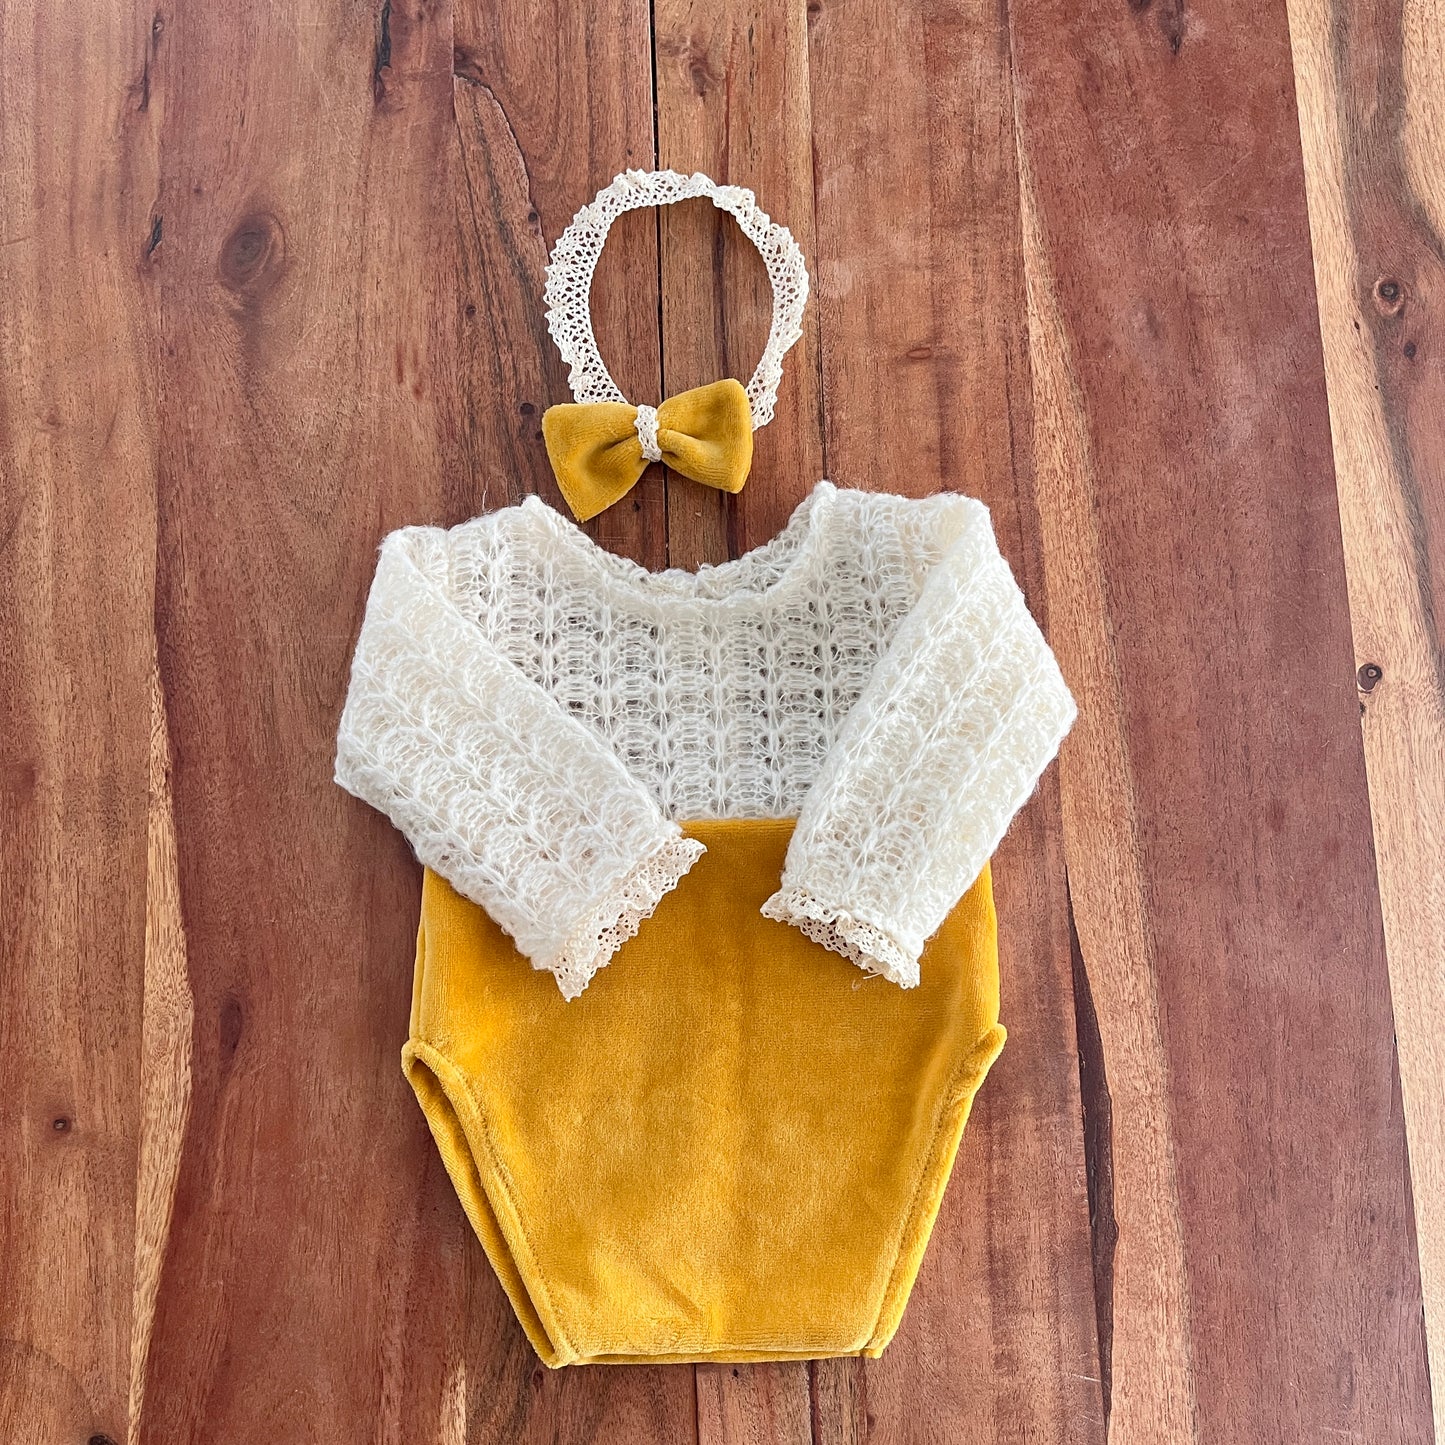 Mary velvet mustard Newborn Photography Prop Outfit For Girl